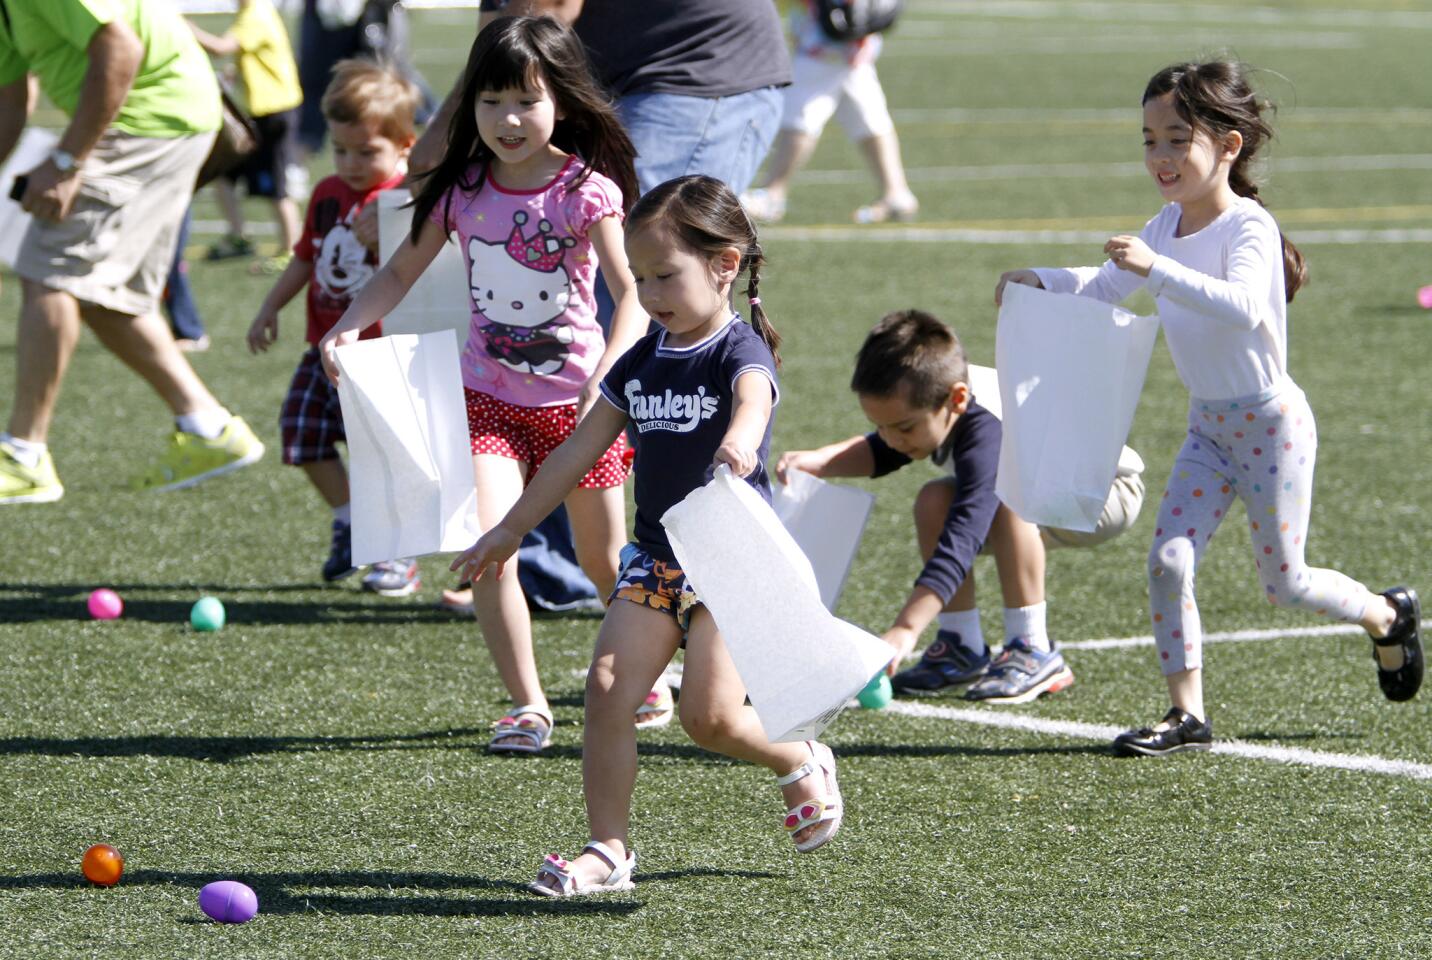 Allyson Oliver, 3 of Glendale, gets to a couple of Easter eggs before others grab them at the City of Glendale Parks & Recreation's Easter Egg Hunt at Pacific Community Center in Glendale on Saturday, March 28, 2015.